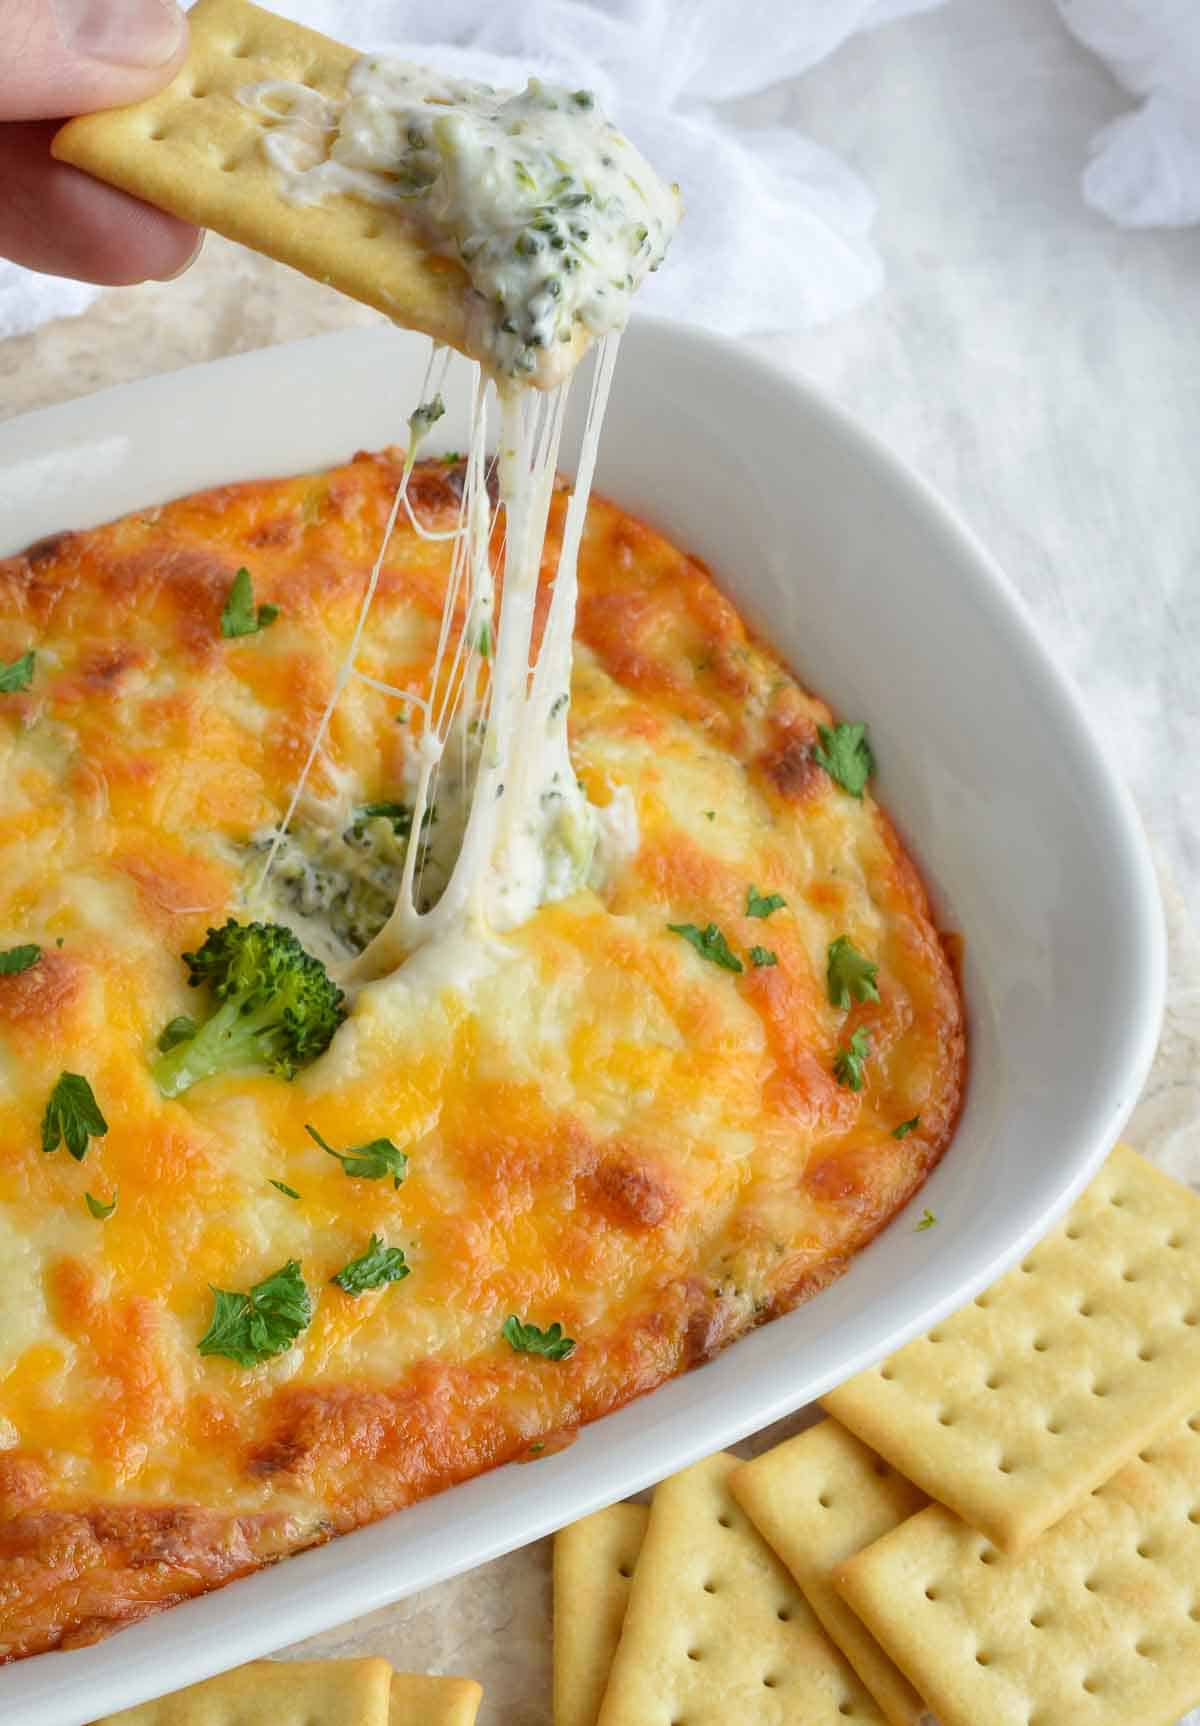 Gooey broccoli and cheese dip